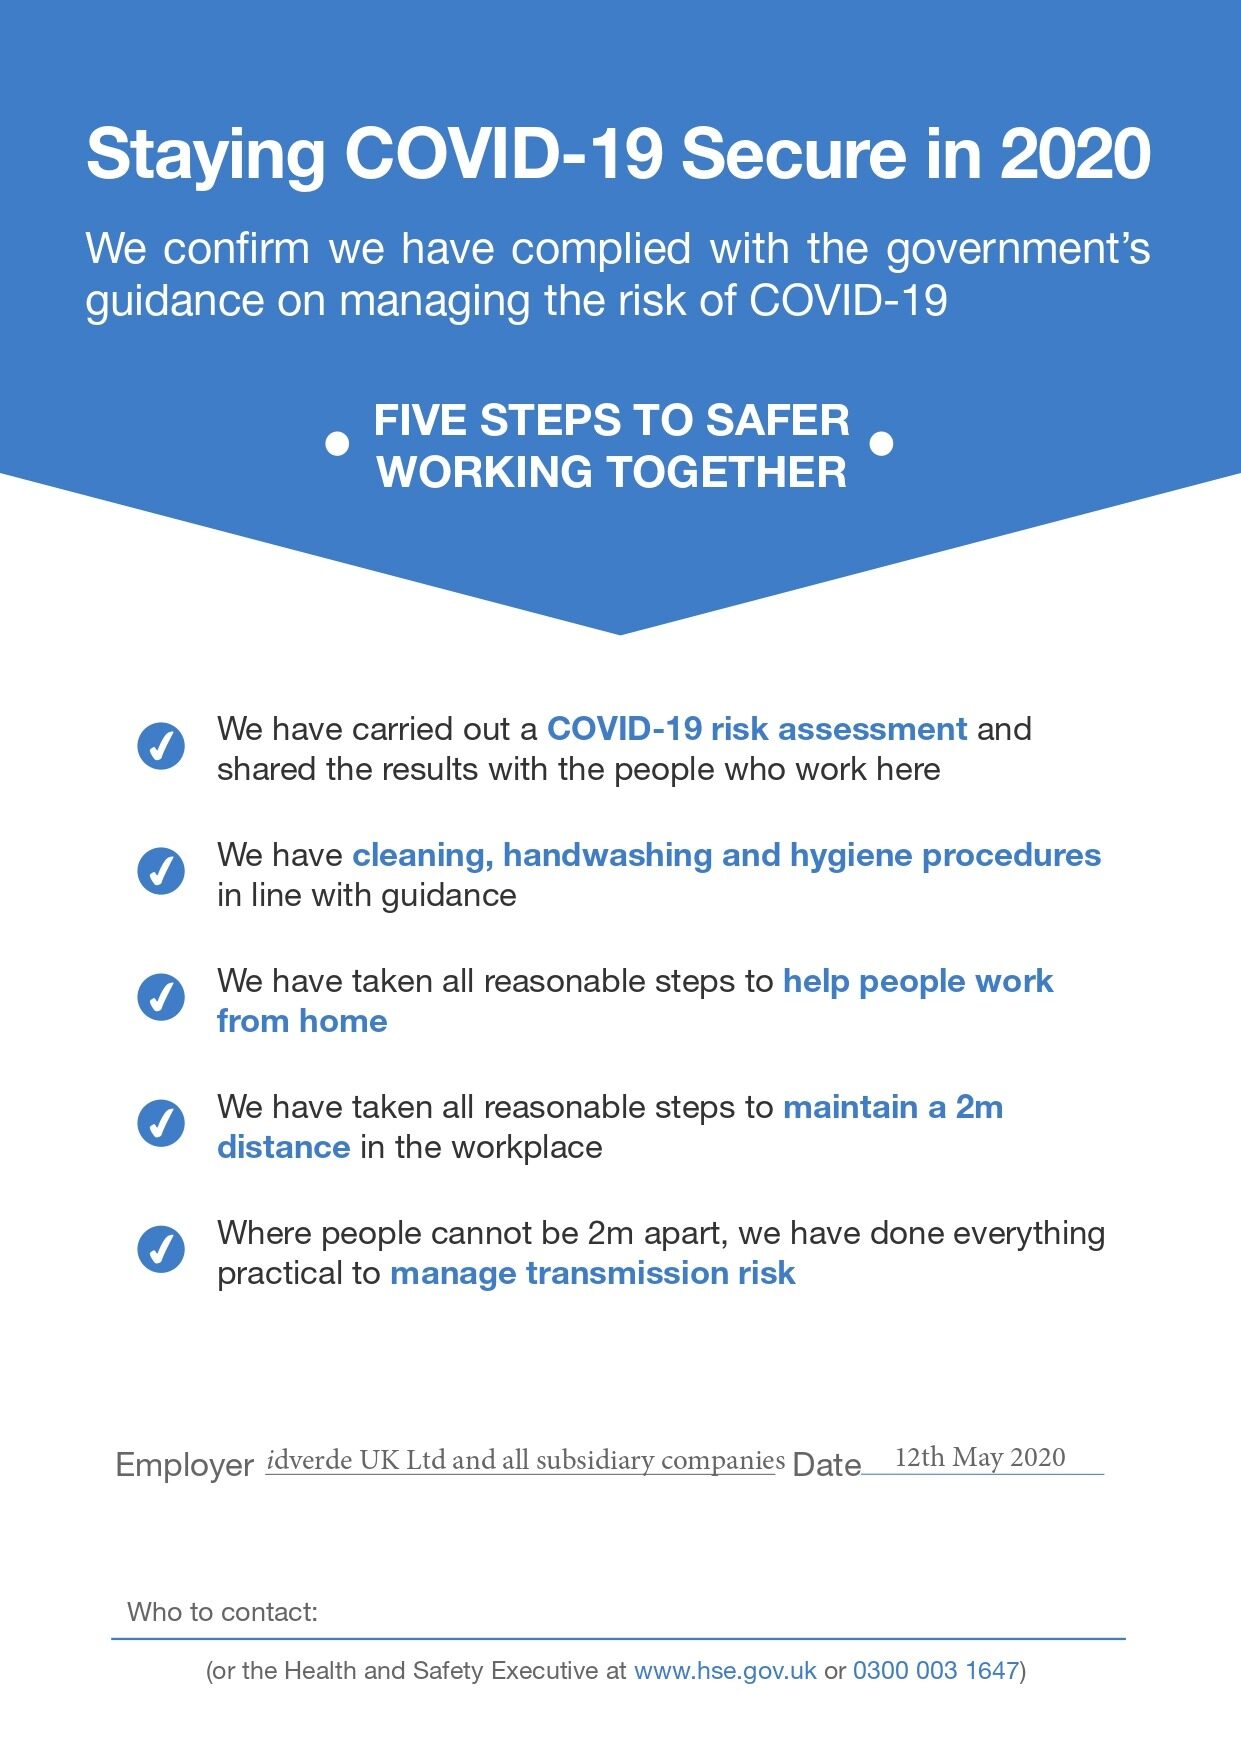 Staying-covid-19-secure-Workplace-Site-Notice-Site-v2_pages-to-jpg-0001